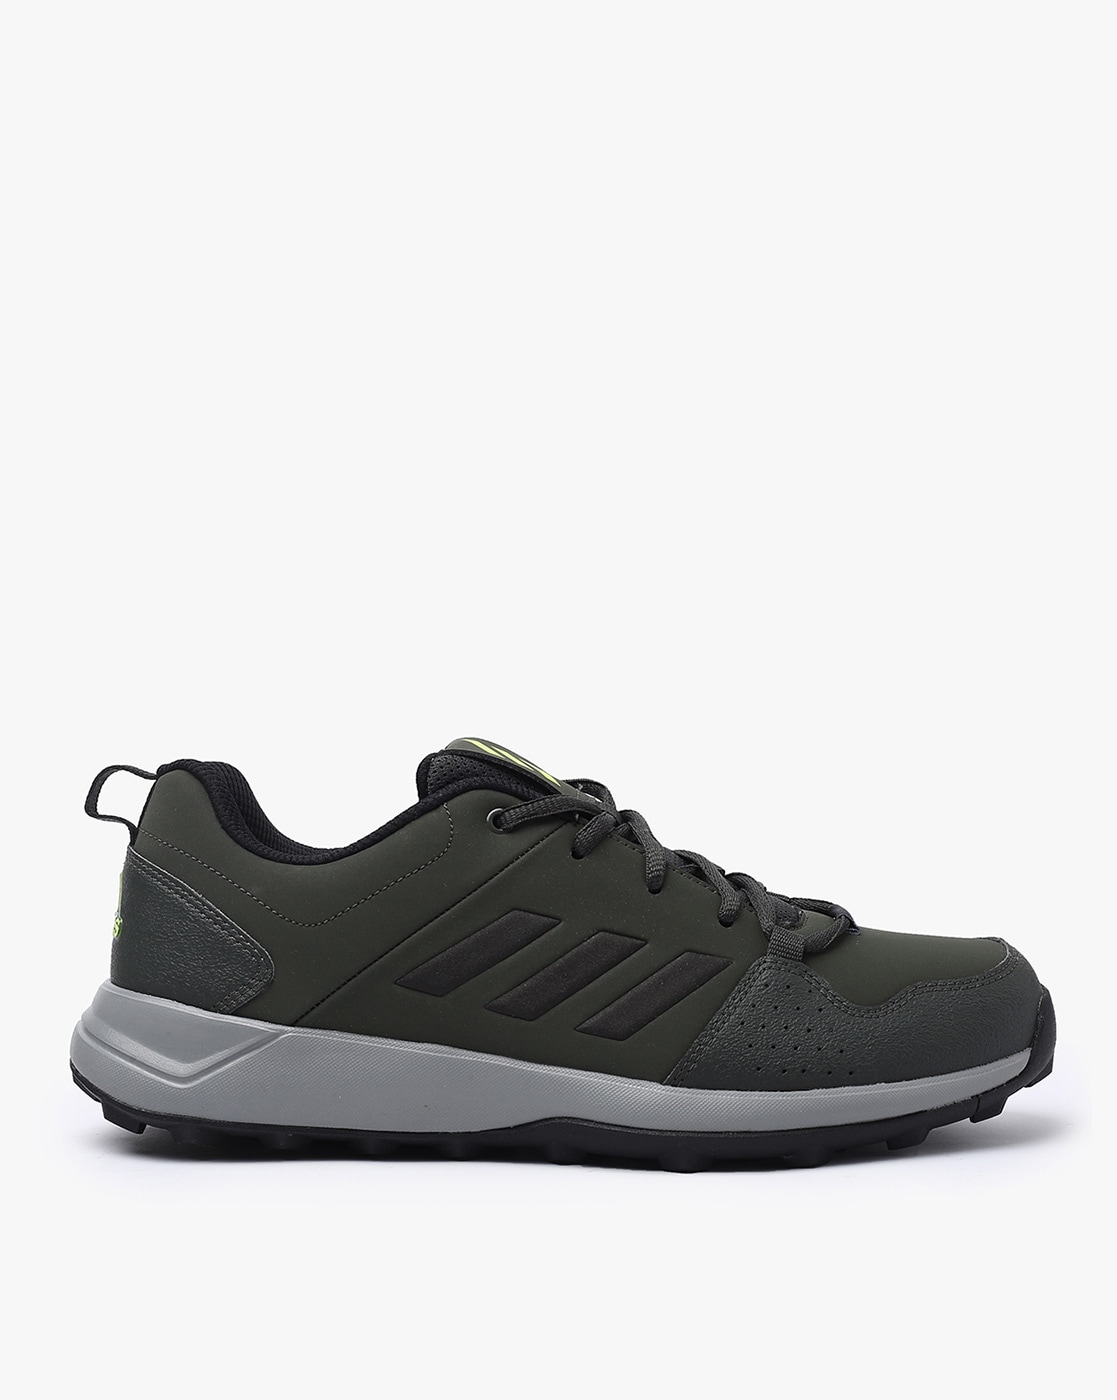 adidas mens olive green shoes